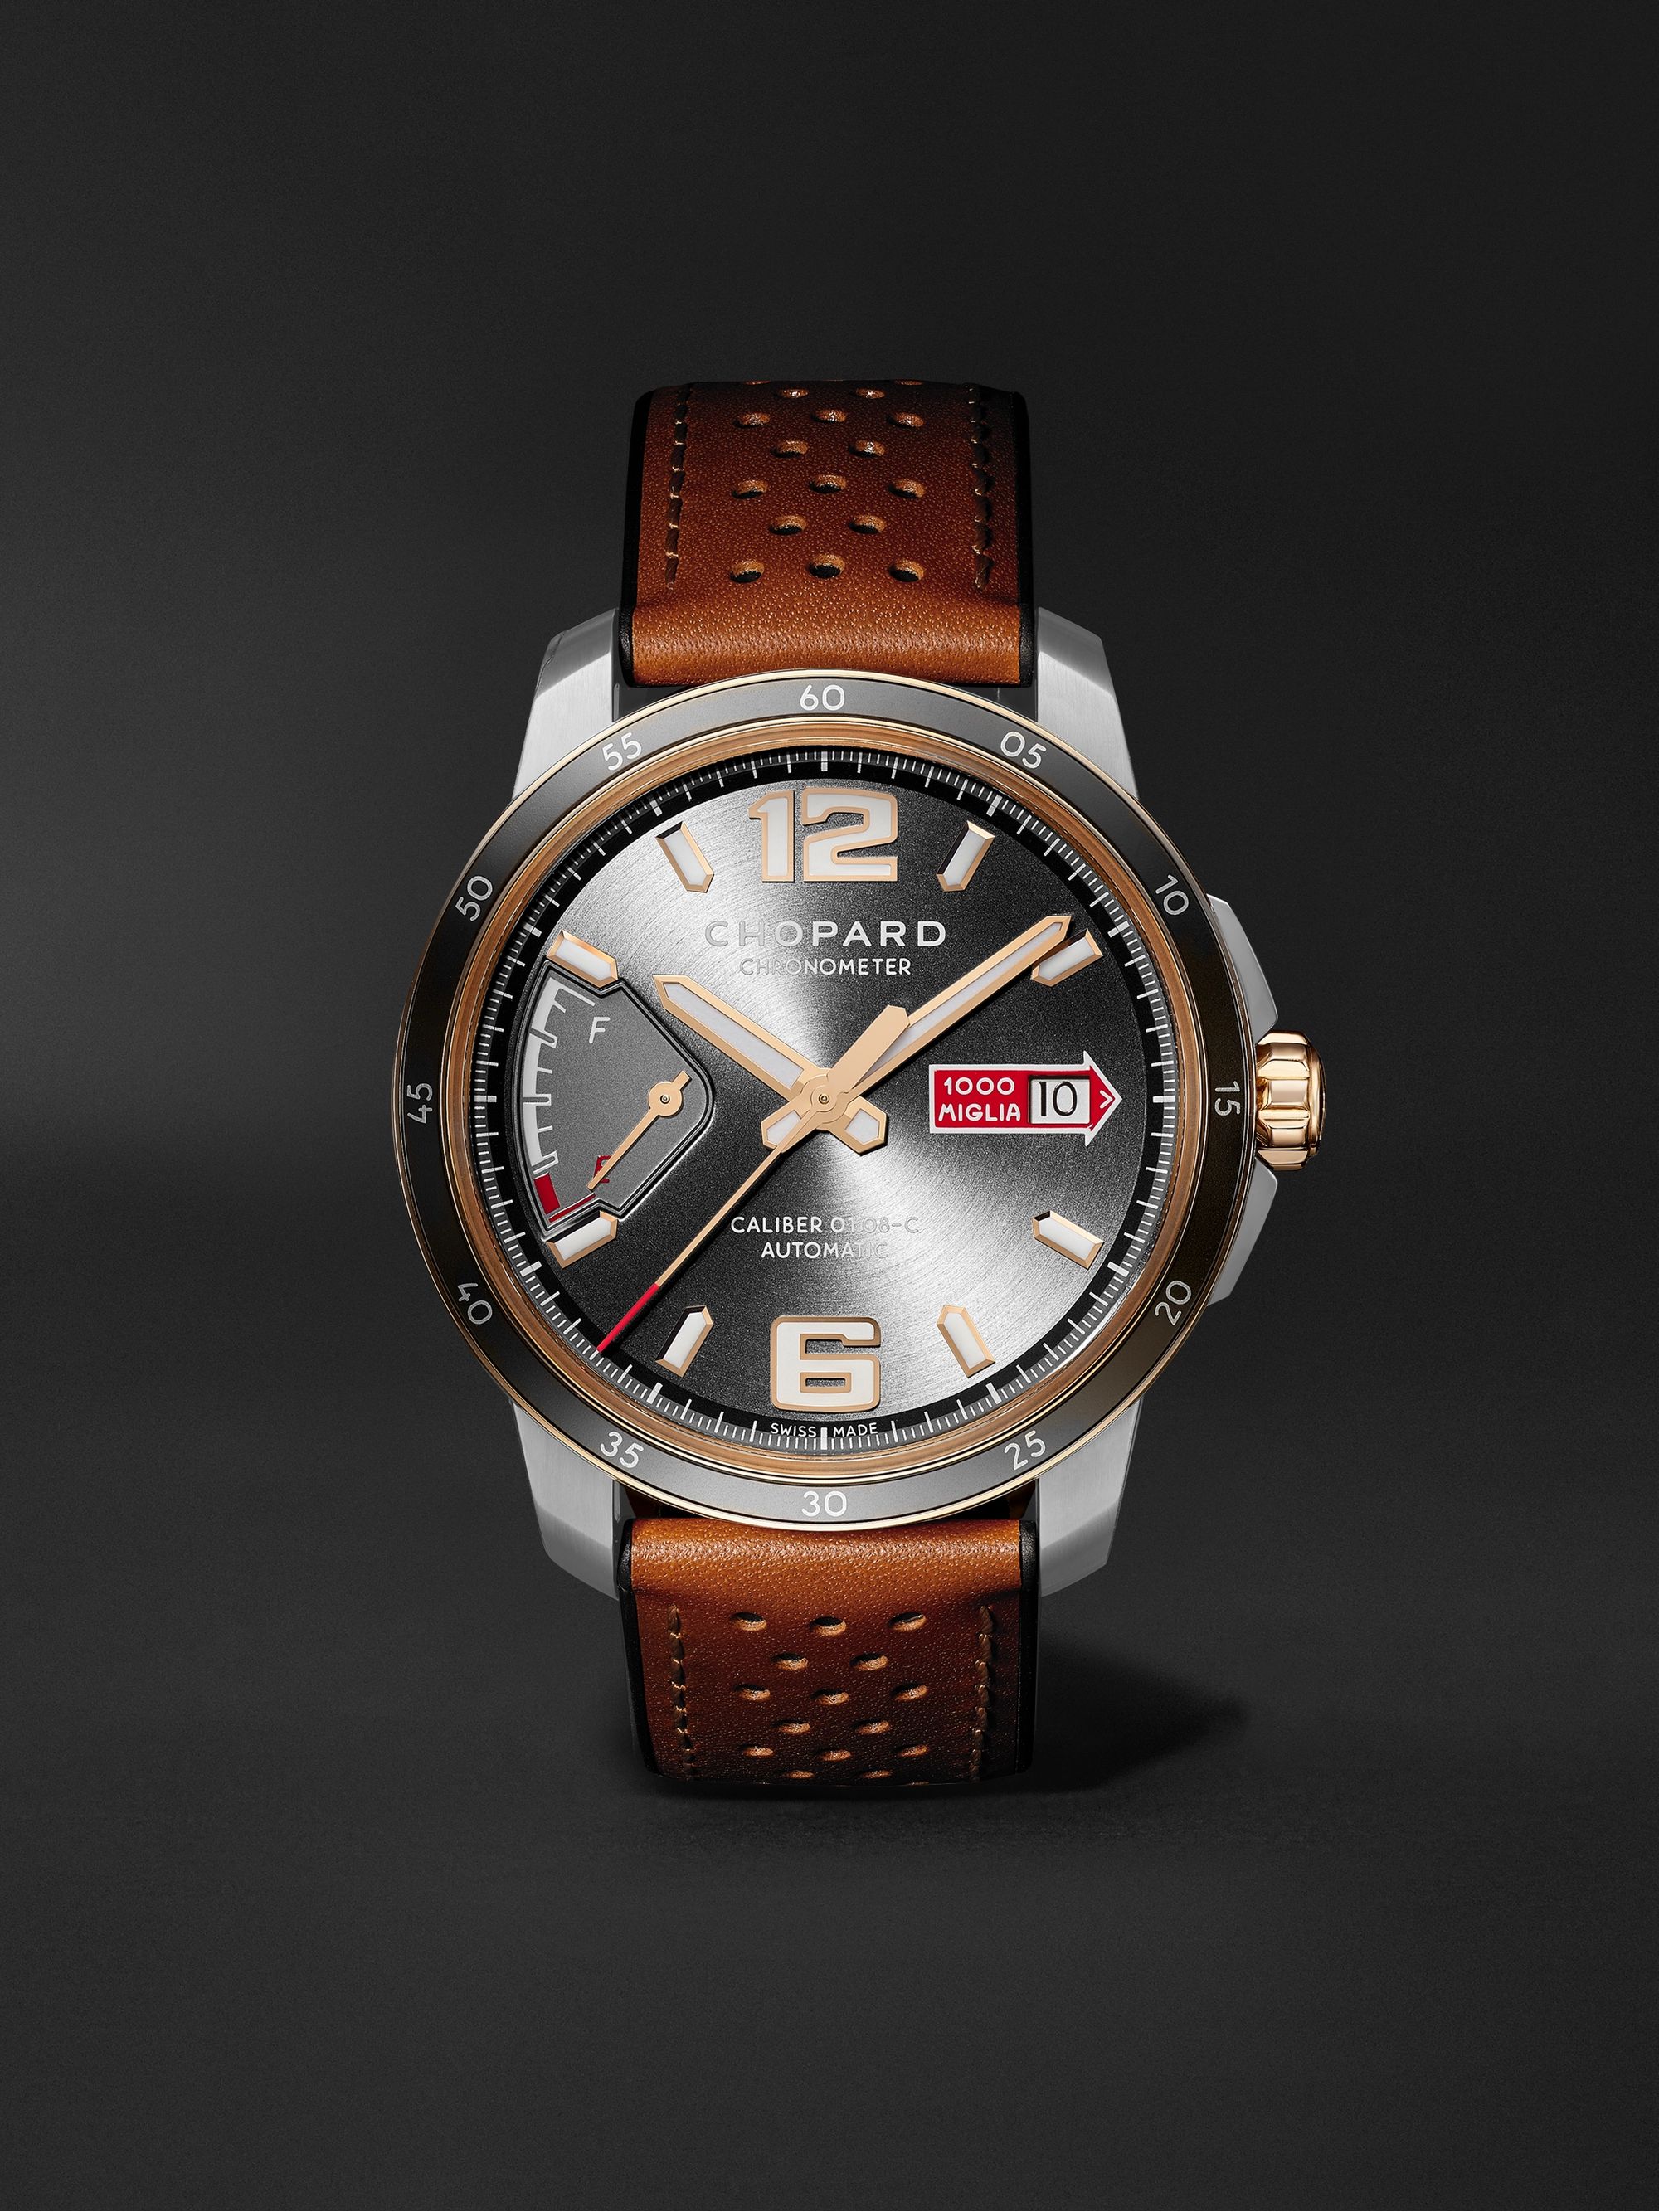 CHOPARD Mille Miglia GTS Power Control Limited Edition Automatic 43mm, 18-Karat Rose Gold, Stainless Steel and Leather Watch, Ref. No. 168566-6001